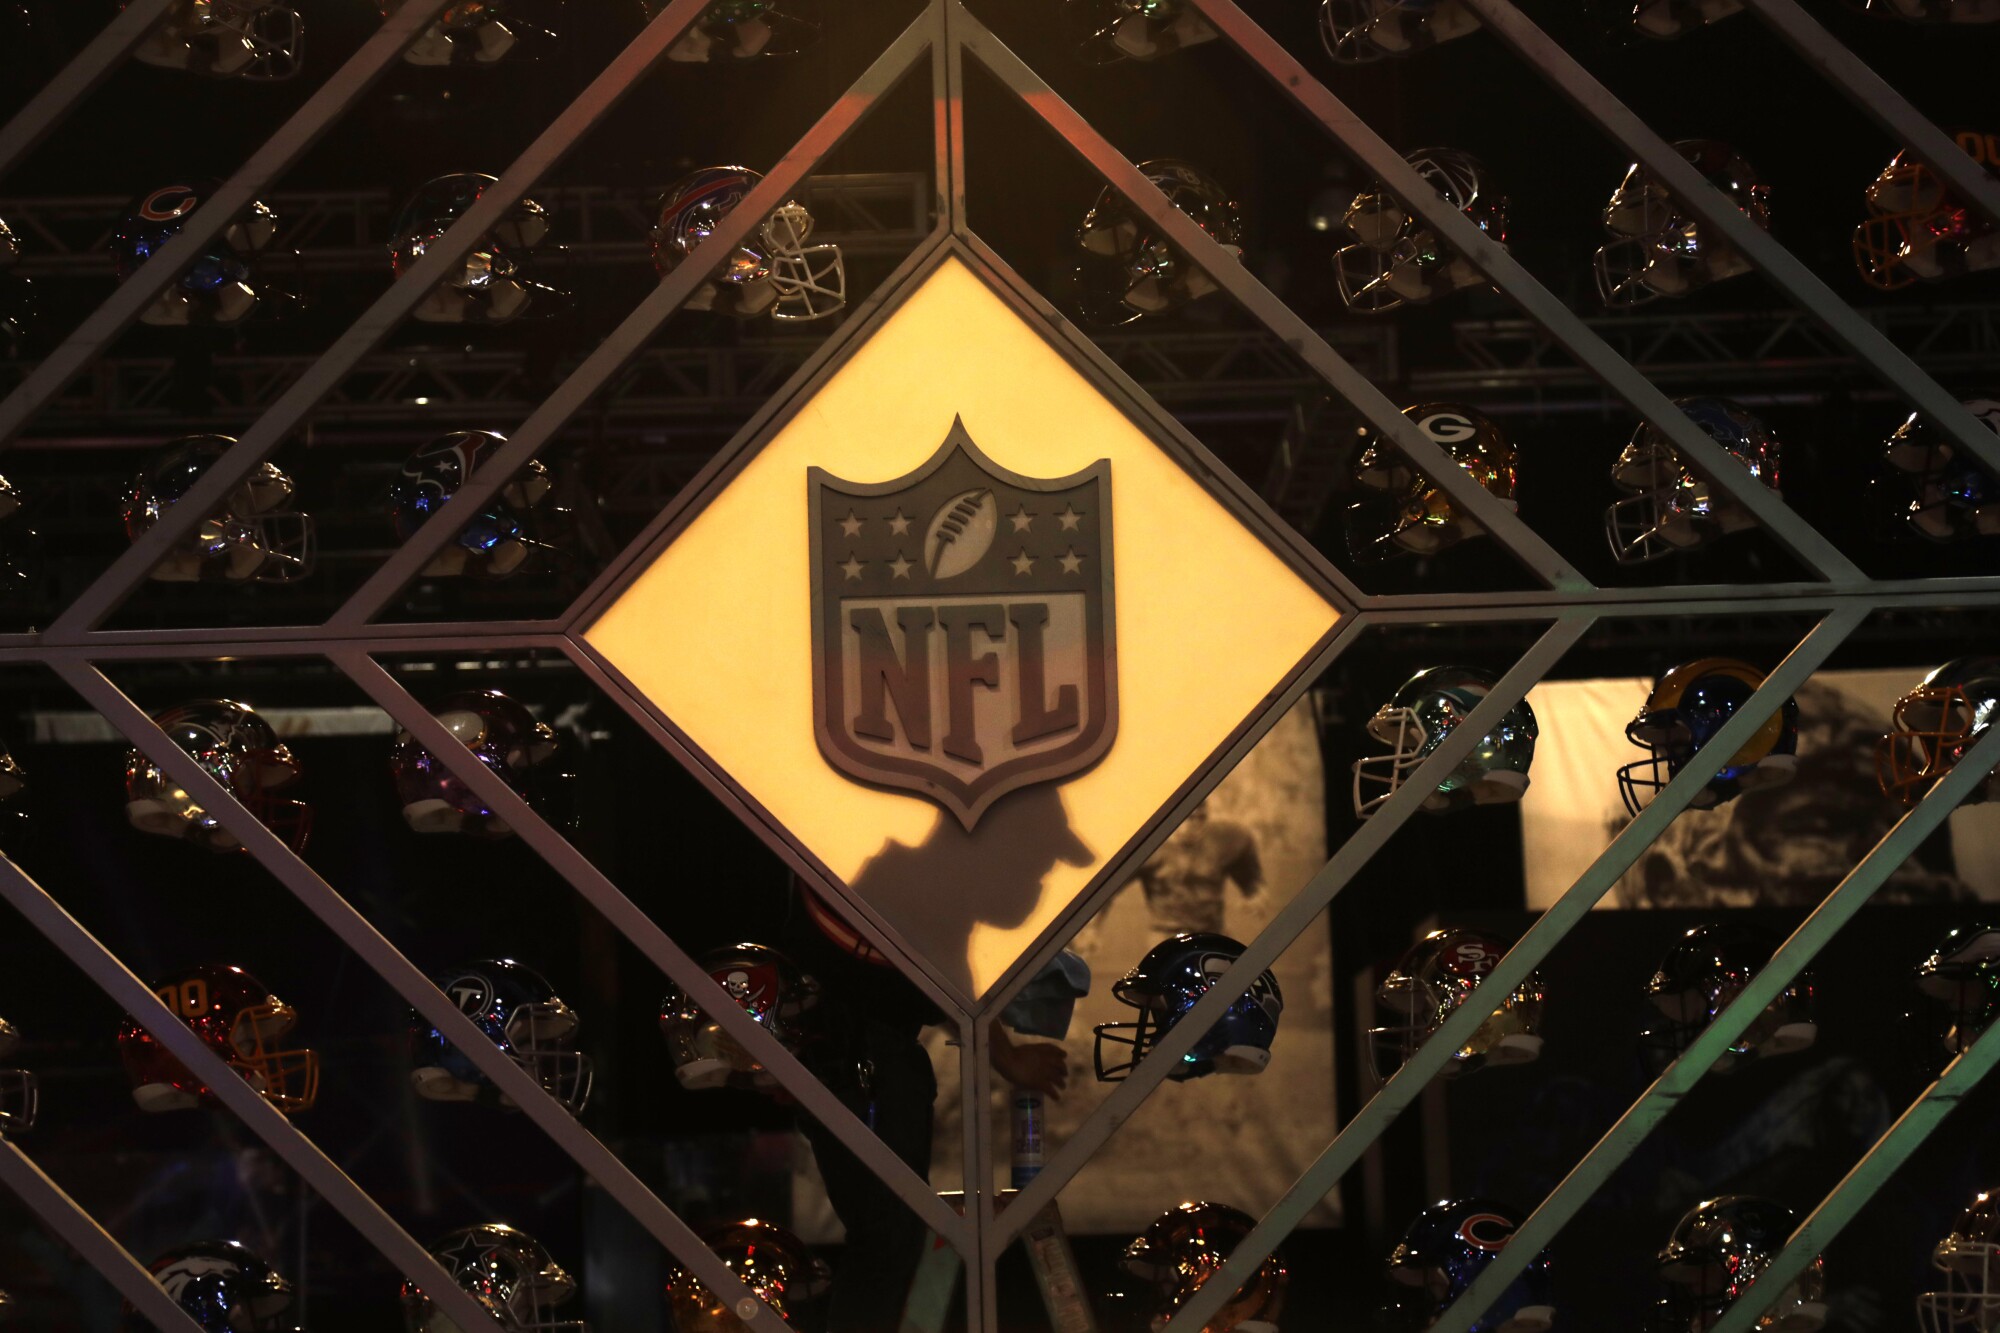 The NFL logo appears with a display of team helmets